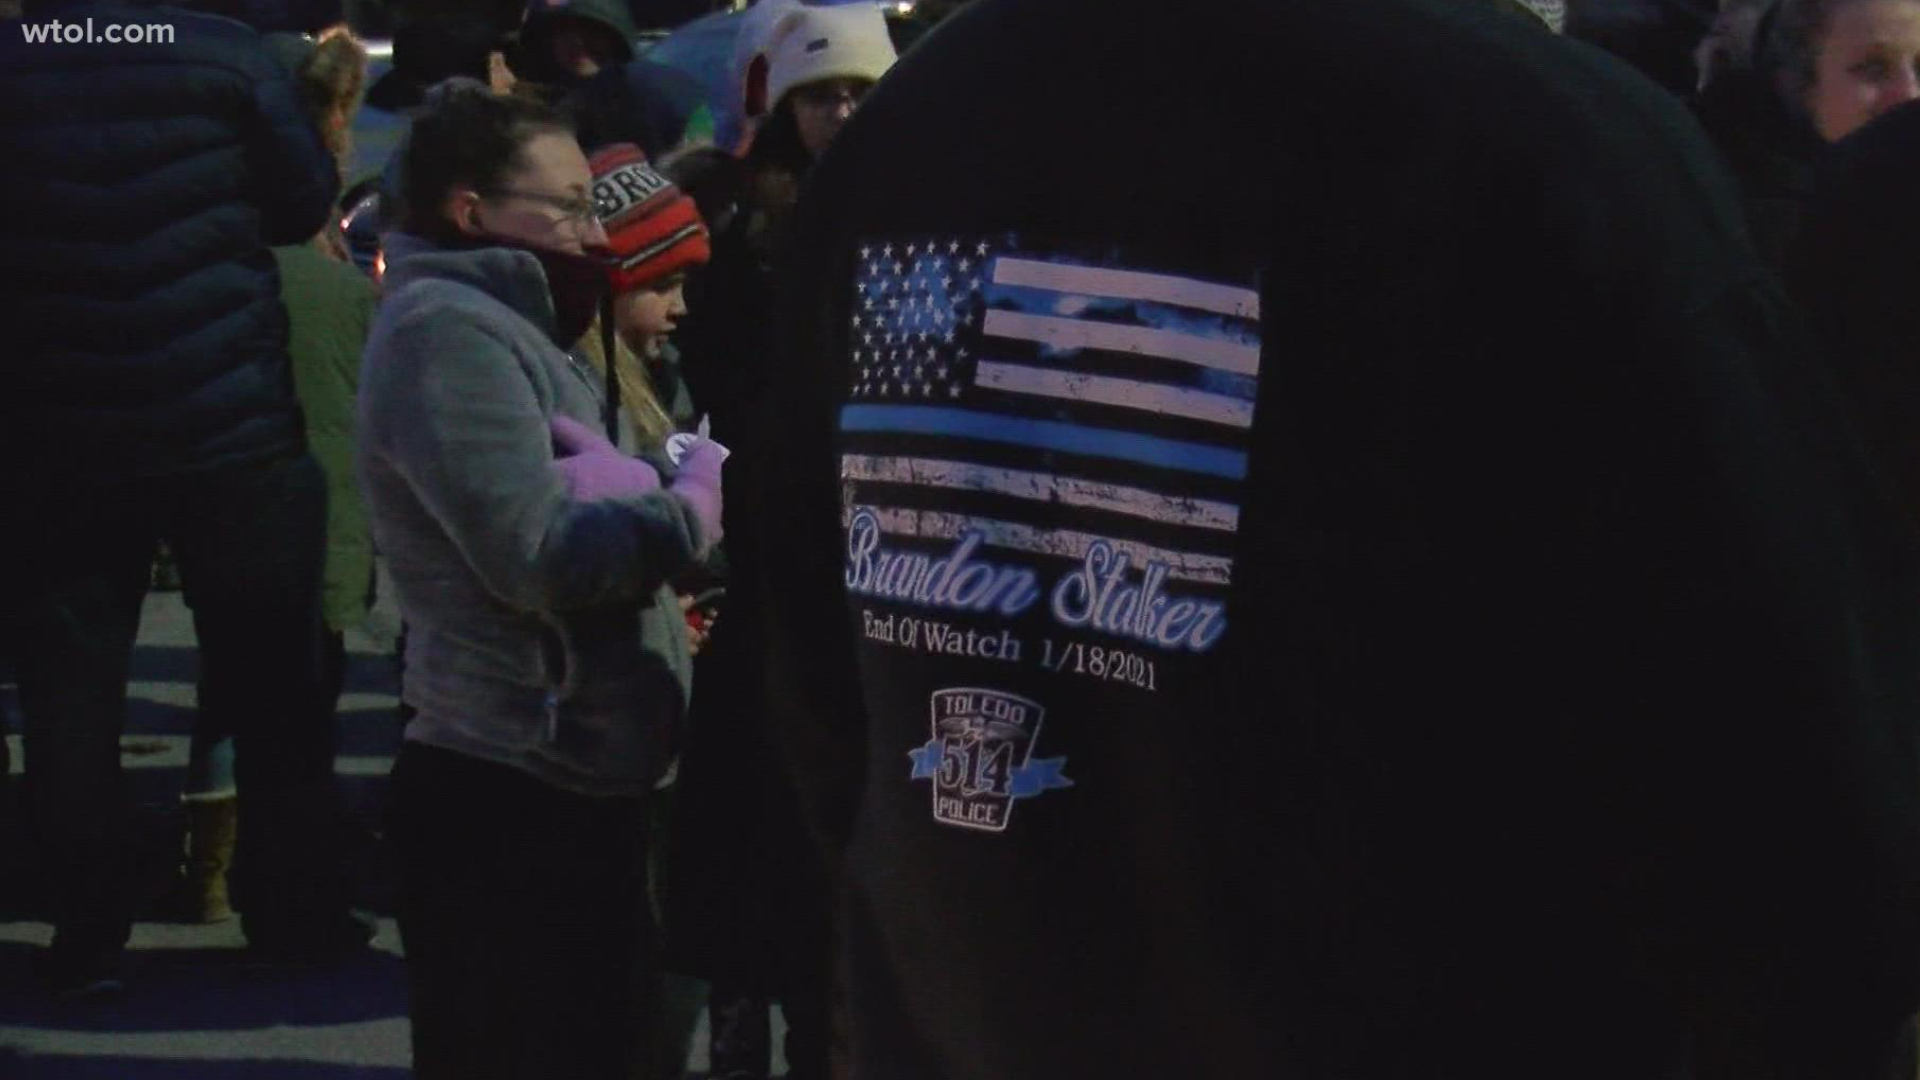 On Jan. 18, 2022, a candlelight vigil marked a solemn anniversary. One year ago, Toledo Police Officer Brandon Stalker was killed in the line of duty.